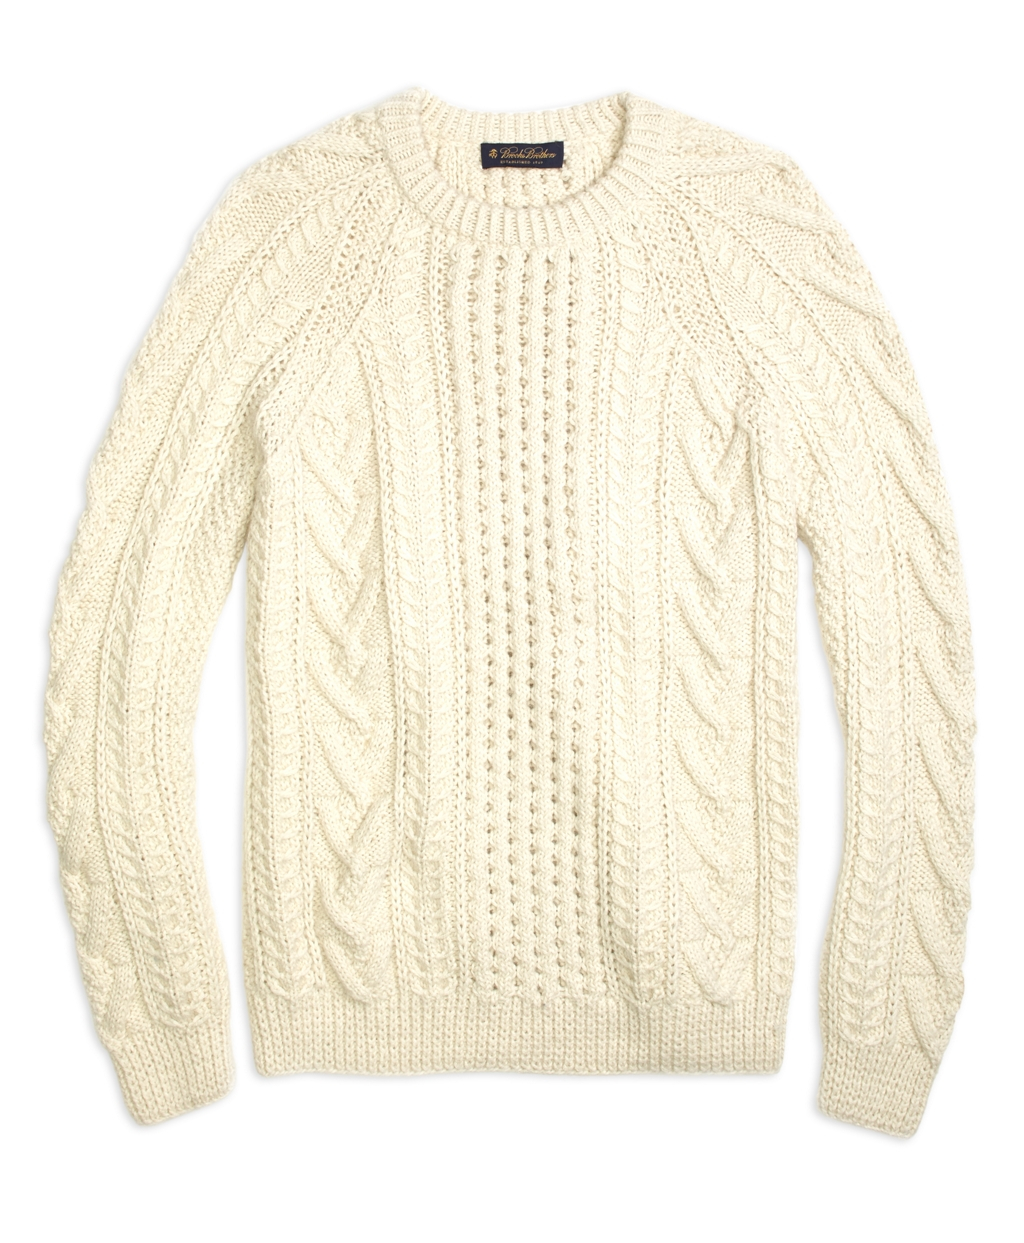 Lyst - Brooks Brothers Handknit Aran Cable Crewneck Sweater in White for Men1024 x 1243